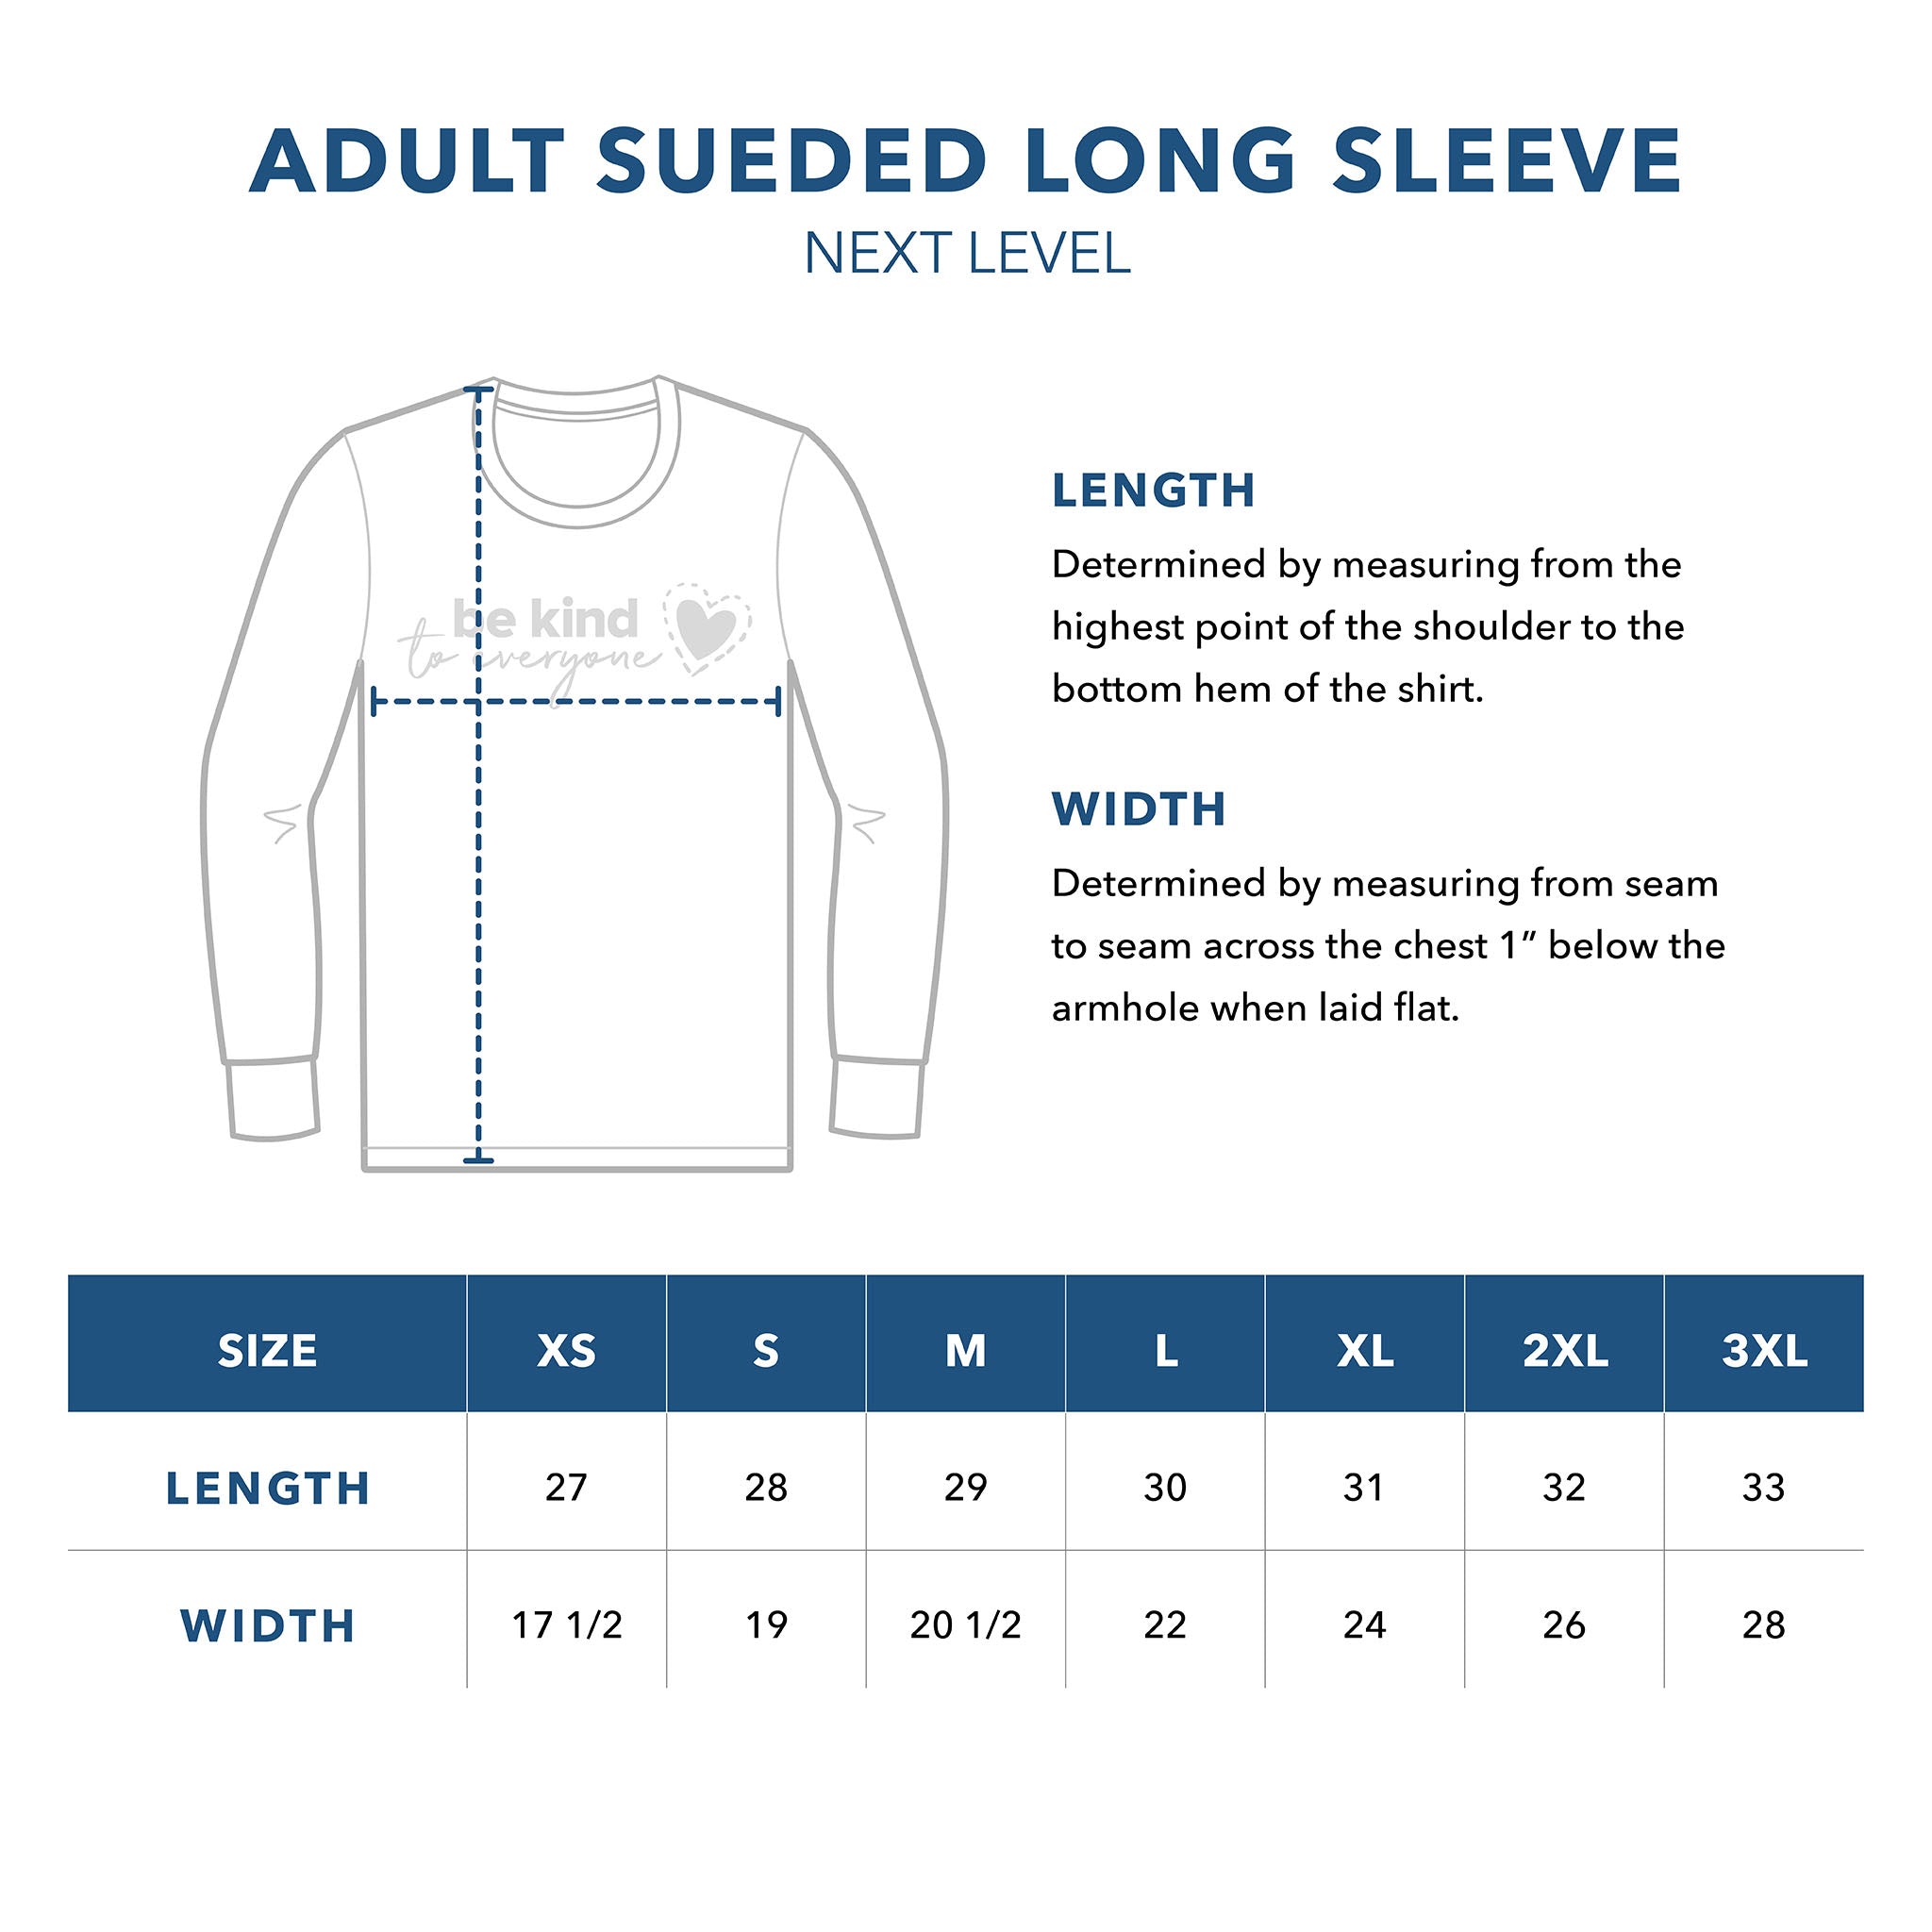 Adult Sueded Long Sleeve Sizing